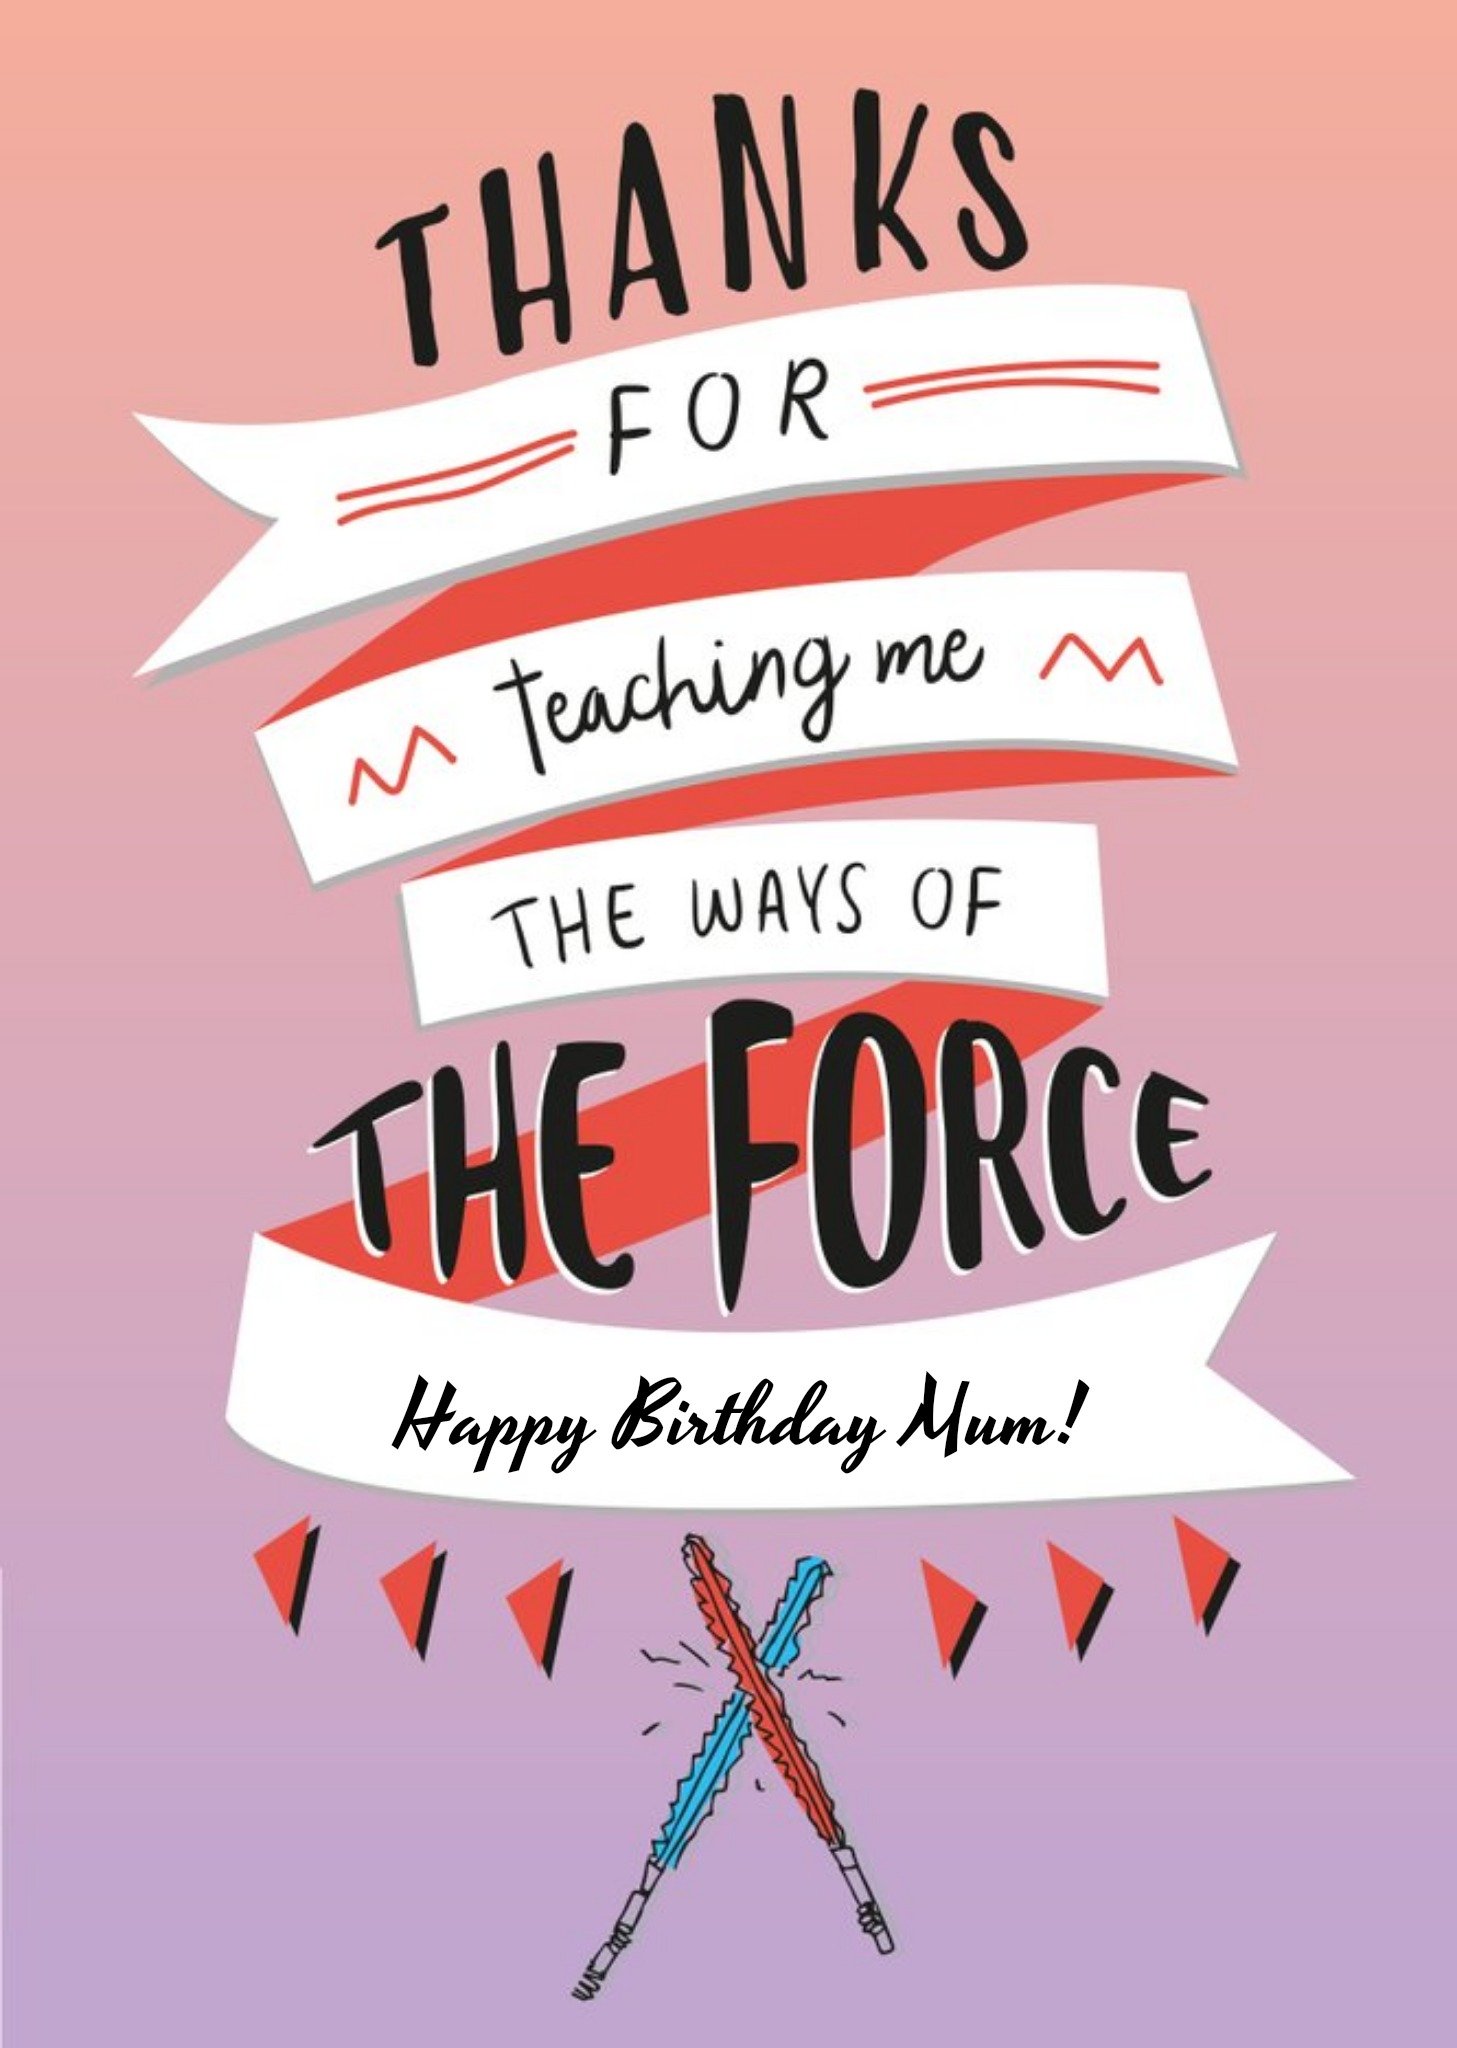 Mum Birthday Card - Star Wars - May The Force Be With You Ecard